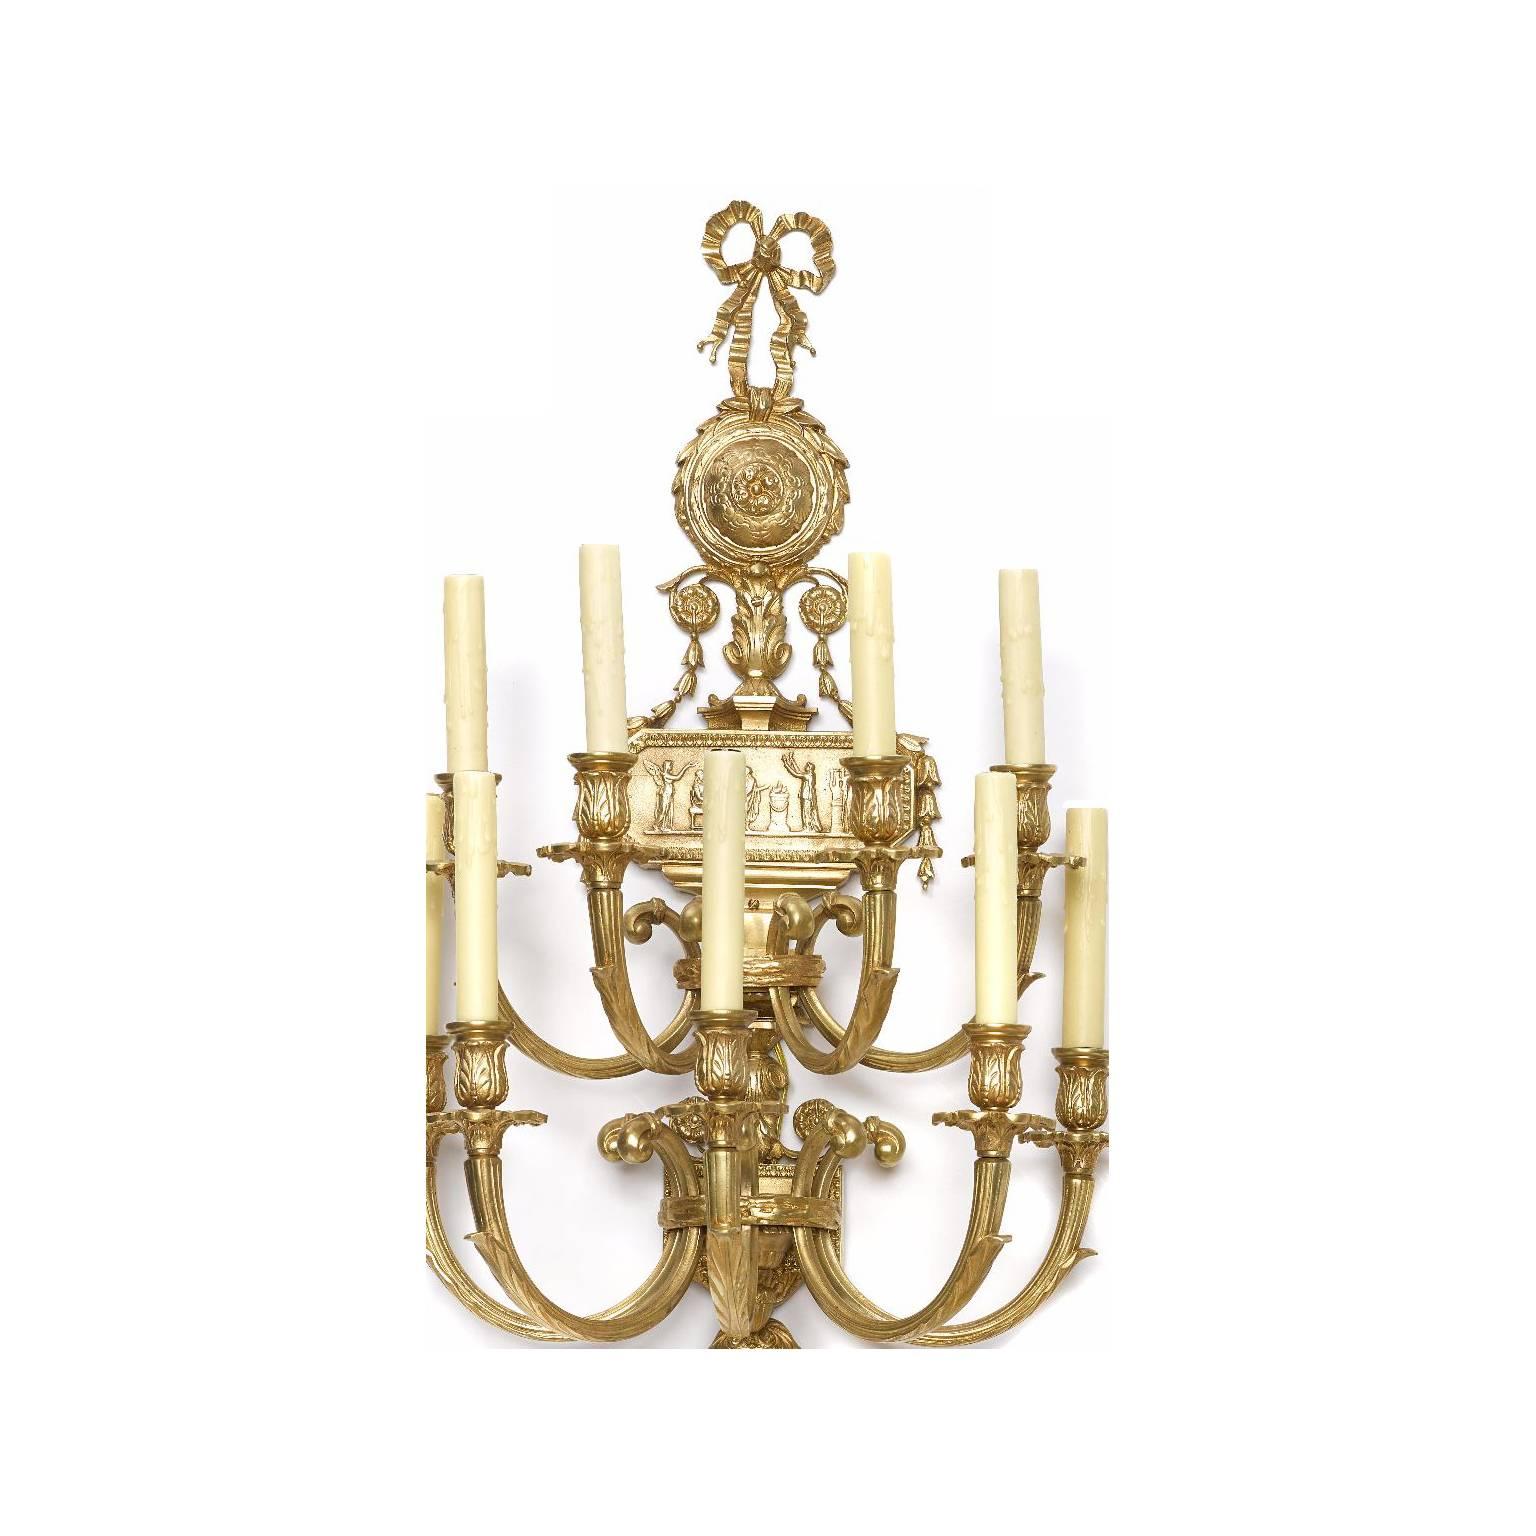 A large pair of neoclassical style gilt bronze eight-light wall lights. The top in the form of a tied bow above a circular rosette. The rectangular back plate with a classical allegorical scene, surmounted with eight scrolled candle arms above a